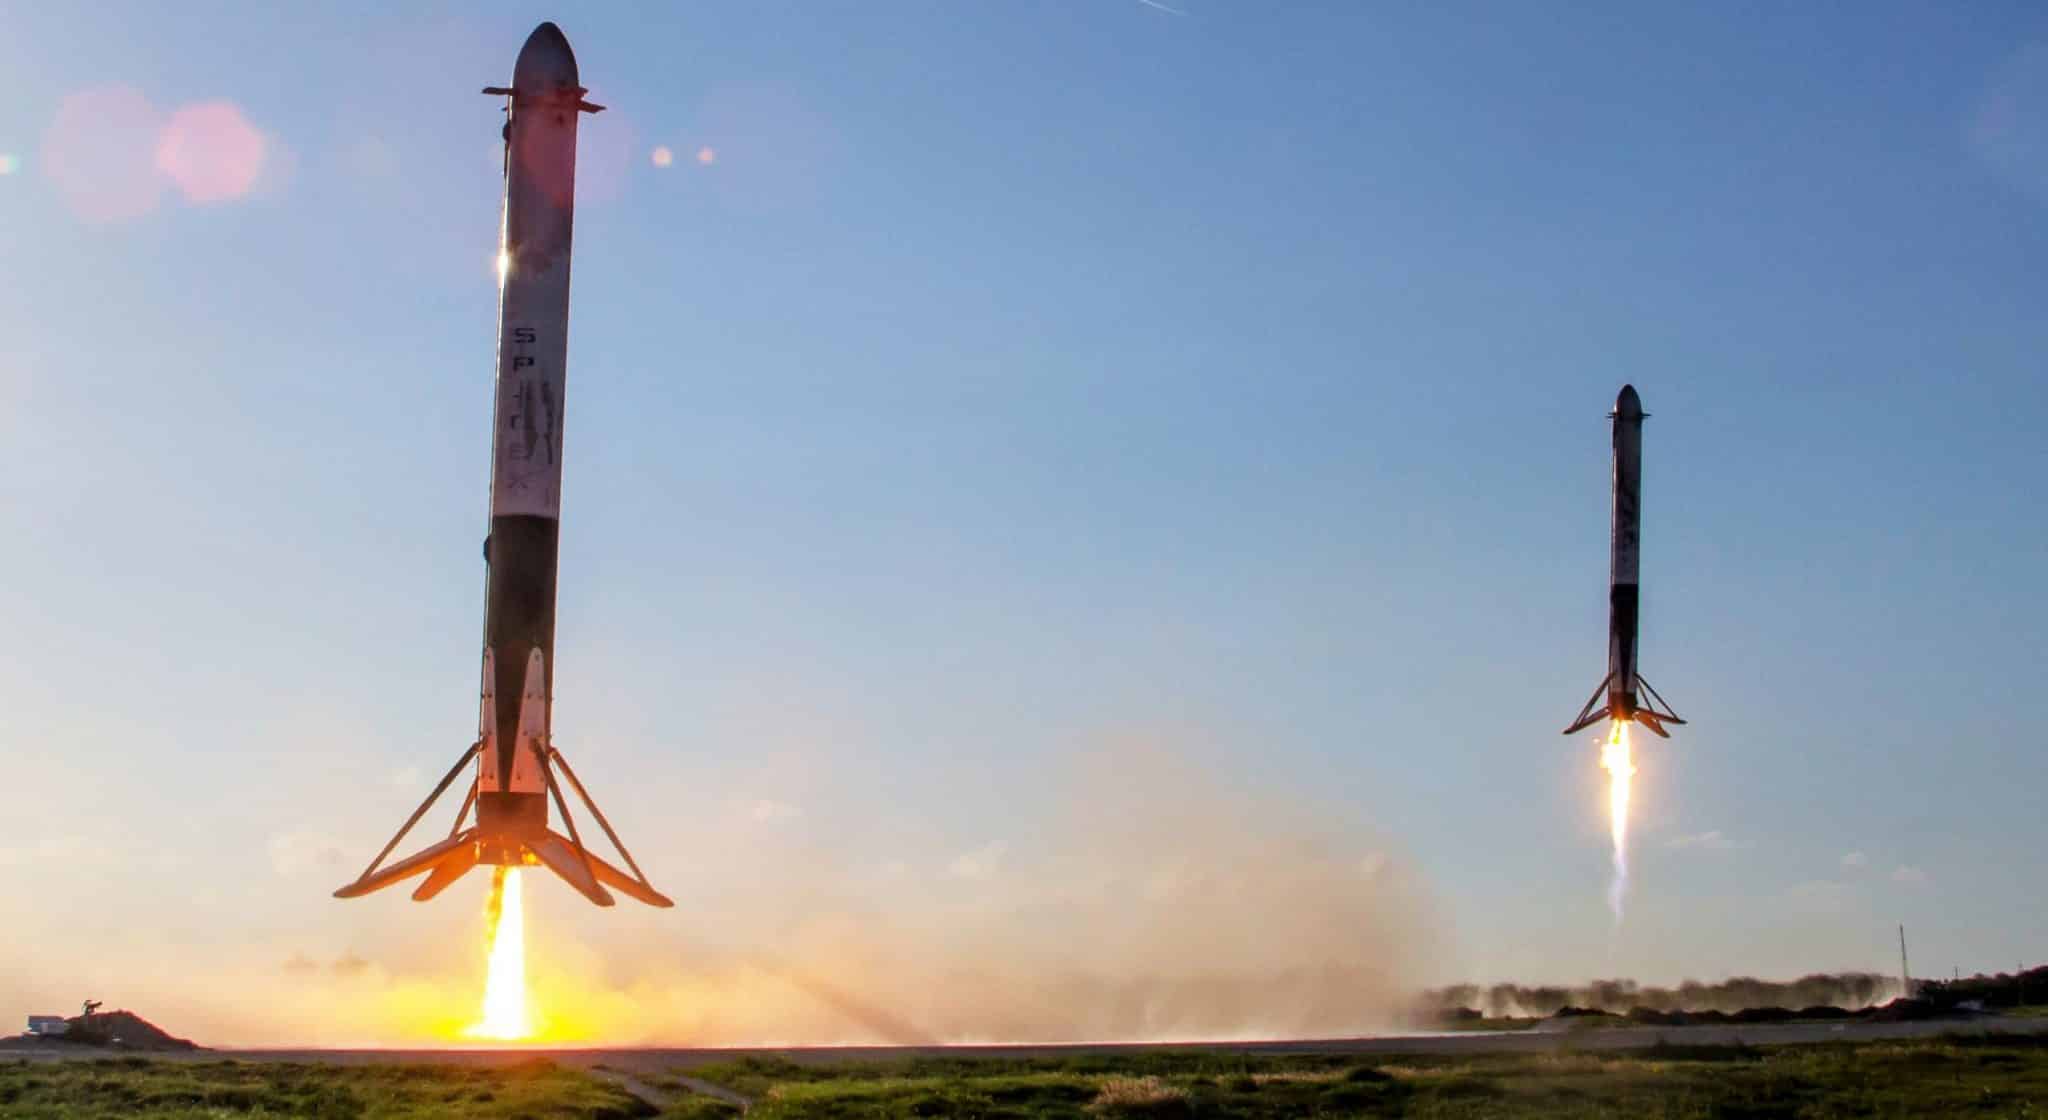 SpaceX’s first Falcon Heavy launch in two years is finally coming